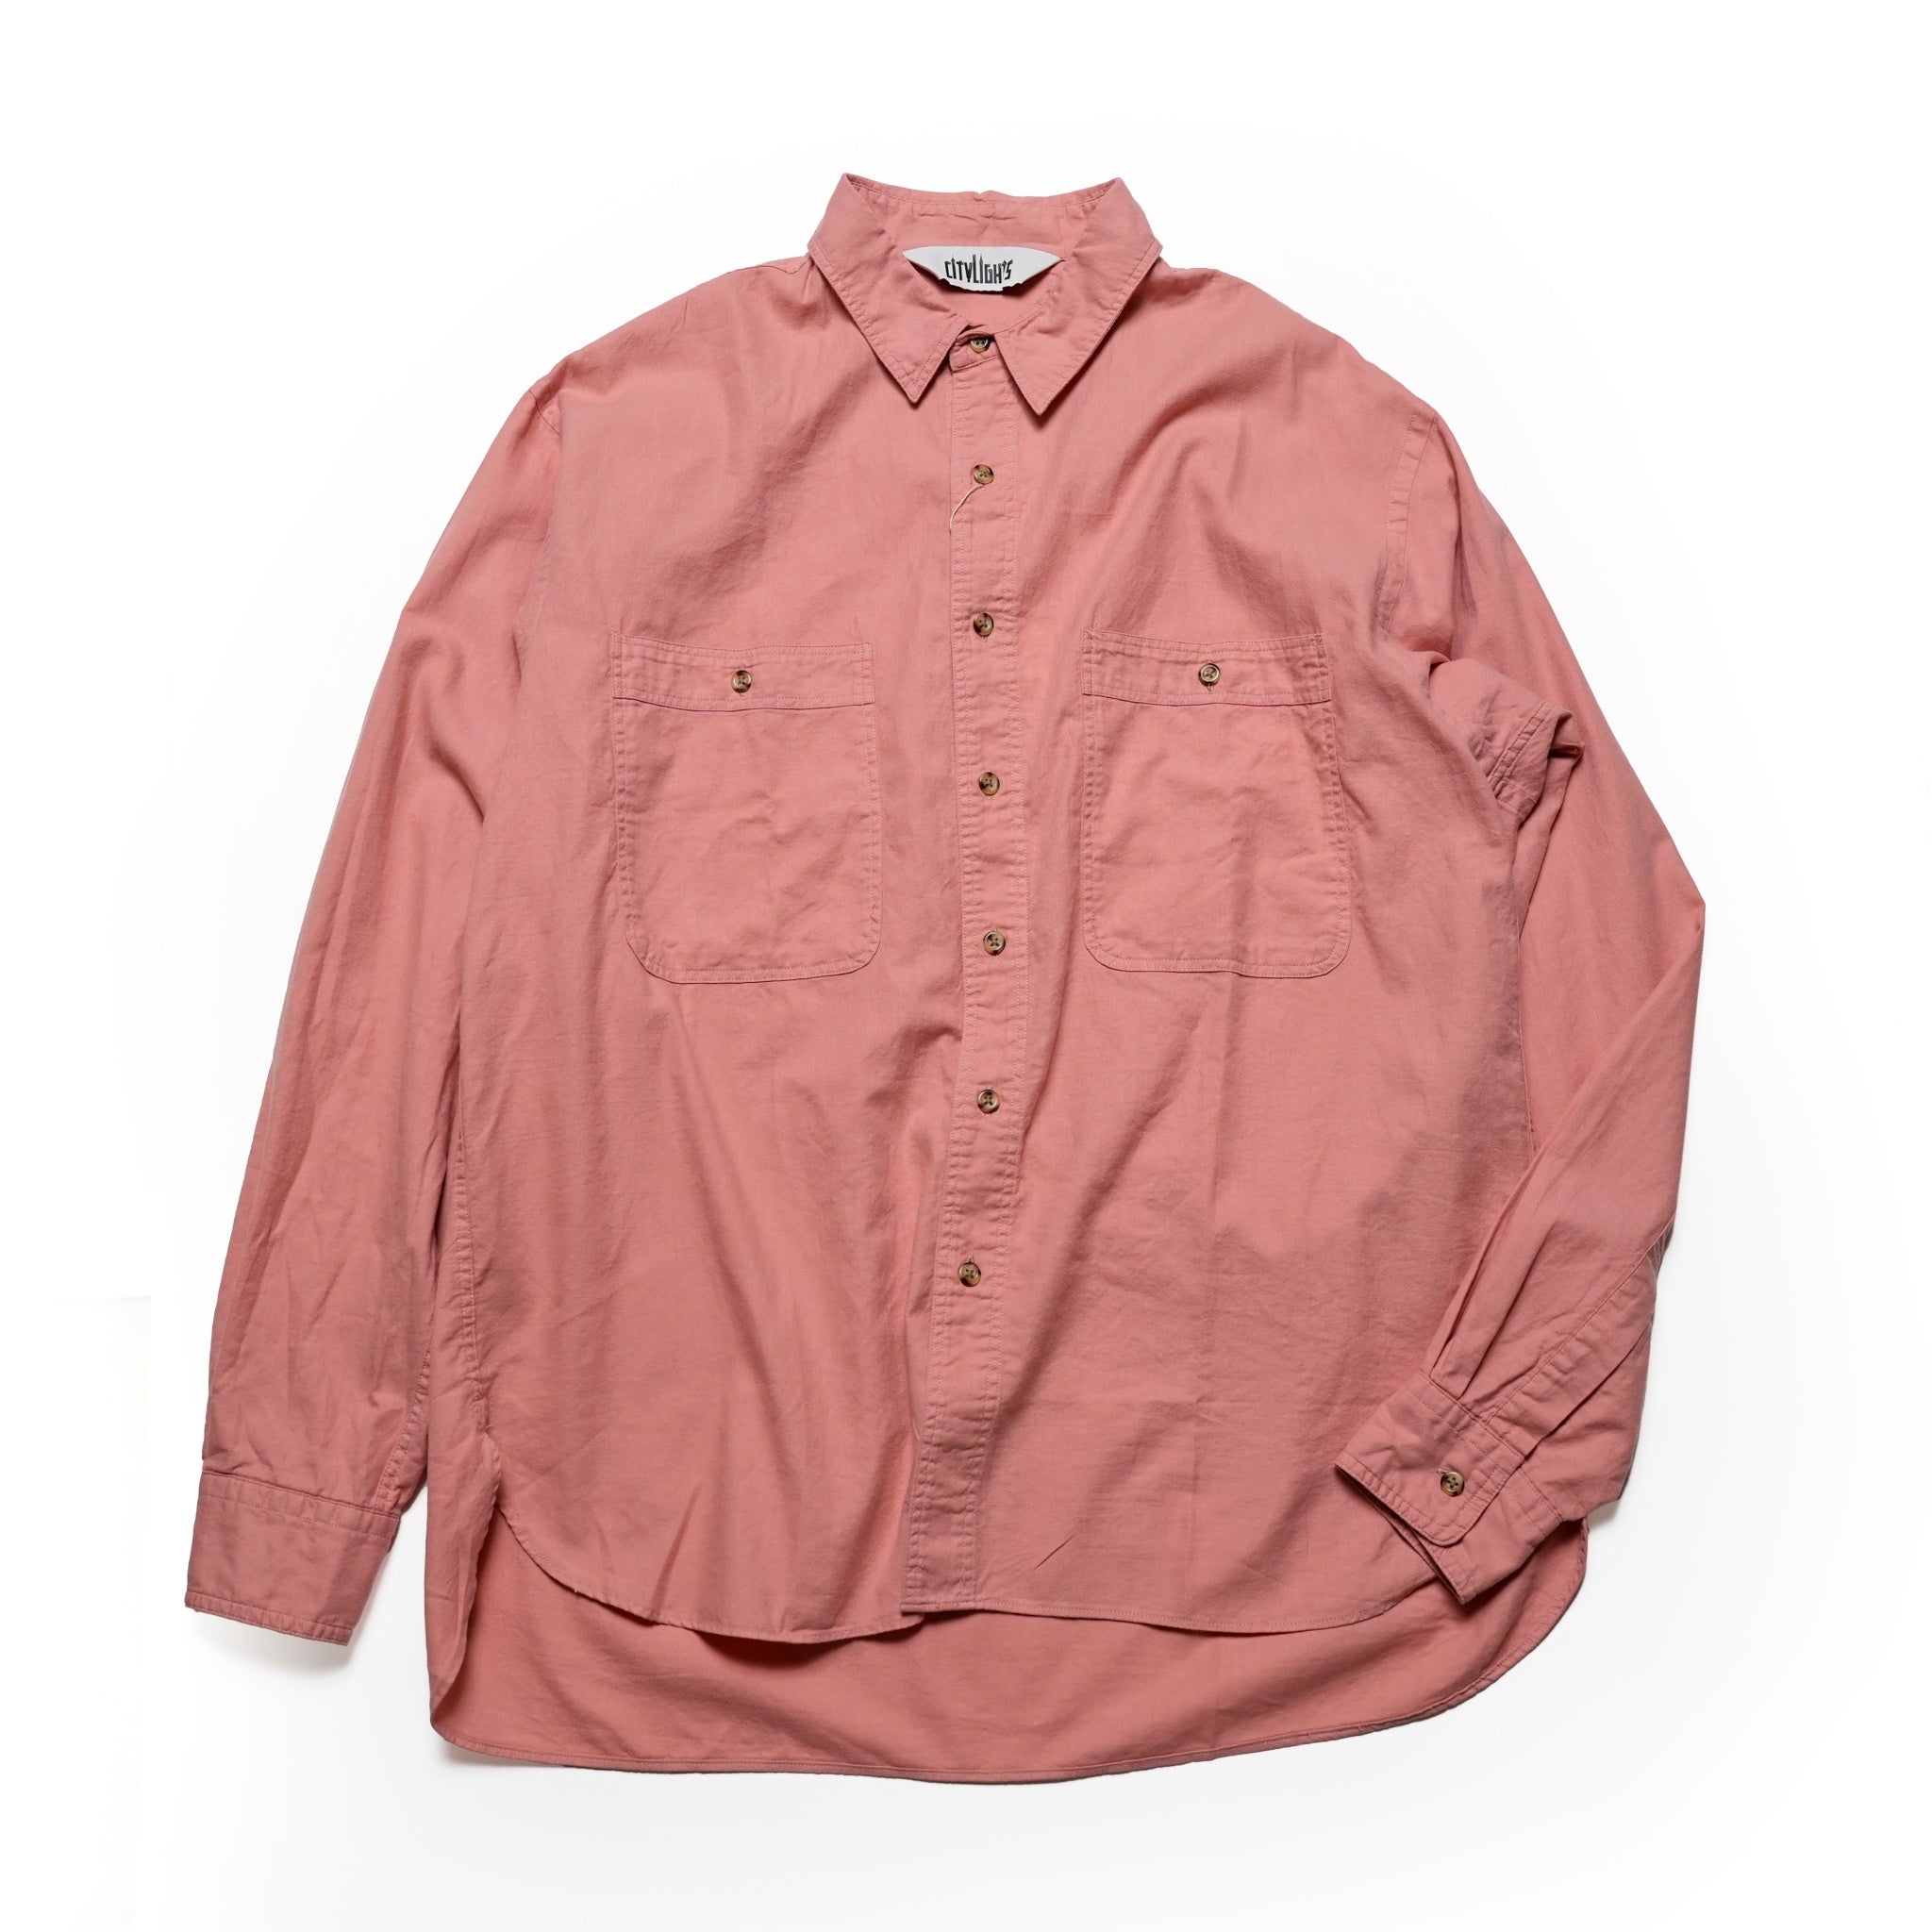 Name:OVER DYE SHIRT | Color:Coral | Size:Regular/Tall 【CITYLIGHTS PRODUCTS_シティライツプロダクツ】